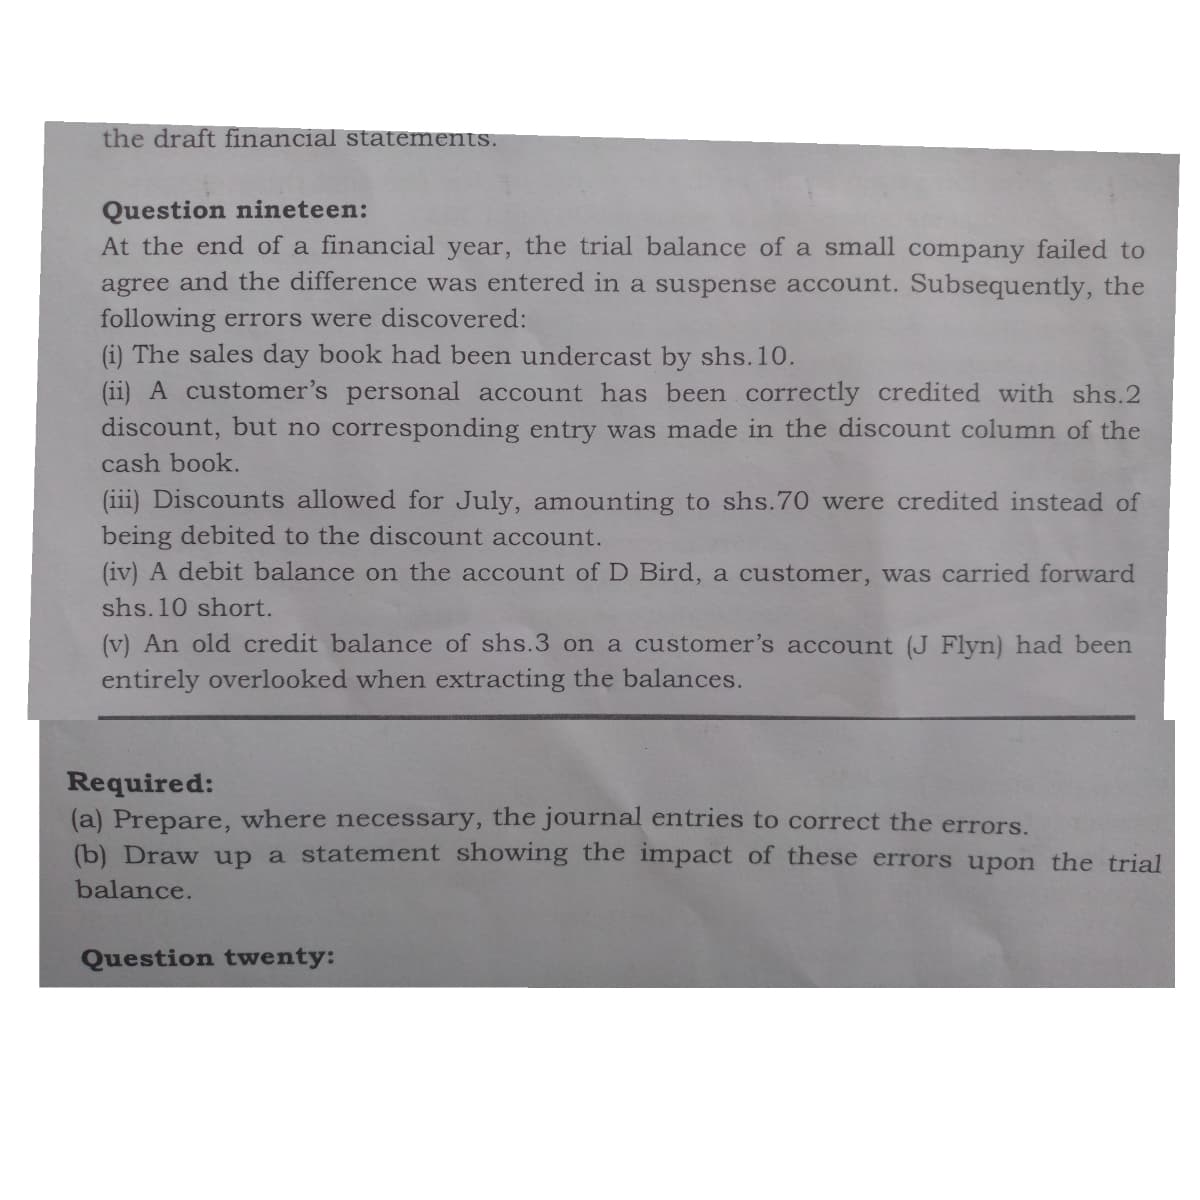 the draft financial statements.
Question nineteen:
At the end of a financial year, the trial balance of a small company failed to
agree and the difference was entered in a suspense account. Subsequently, the
following errors were discovered:
(i) The sales day book had been undercast by shs. 10.
(ii) A customer's personal account has been correctly credited with shs.2
discount, but no corresponding entry was made in the discount column of the
cash book.
(iii) Discounts allowed for July, amounting to shs.70 were credited instead of
being debited to the discount account.
(iv) A debit balance on the account of D Bird, a customer, was carried forward
shs. 10 short.
(v) An old credit balance of shs.3 on a customer's account (J Flyn) had been
entirely overlooked when extracting the balances.
Required:
(a) Prepare, where necessary, the journal entries to correct the errors.
(b) Draw up a statement showing the impact of these errors upon the trial
balance.
Question twenty:
